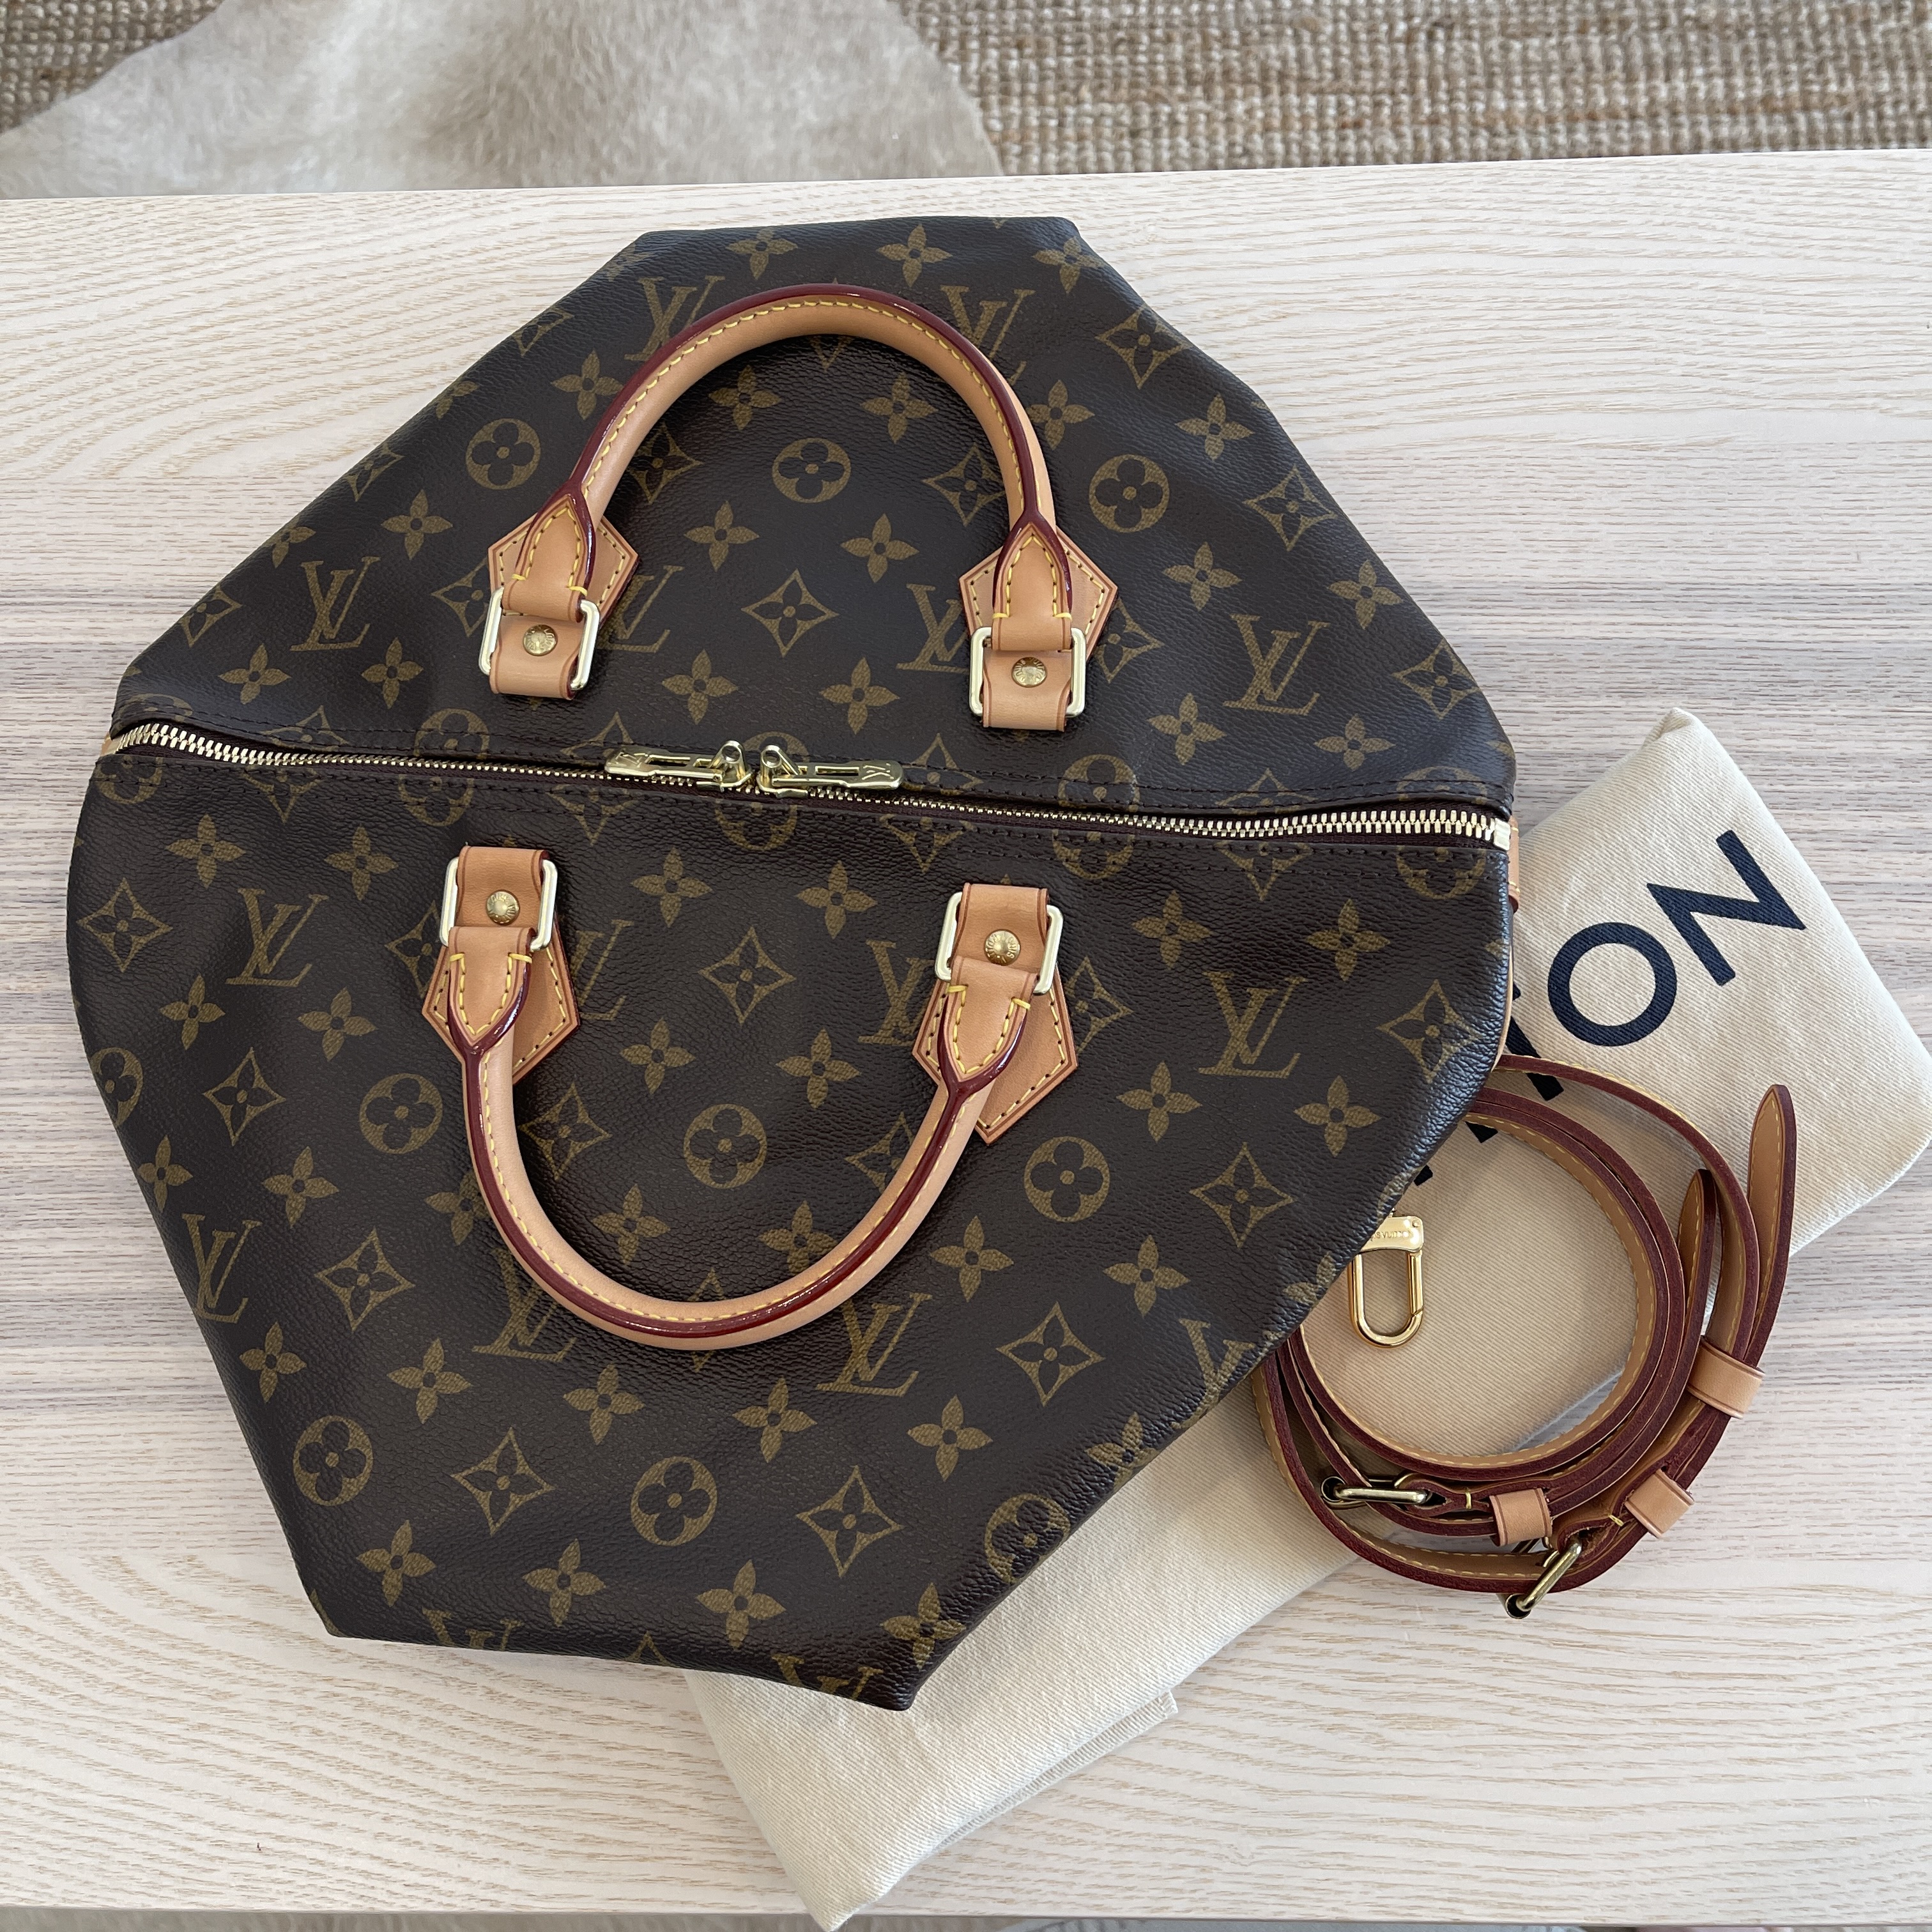 Vintage and Vampires ™: Louis Vuitton Speedy 35, but which style?